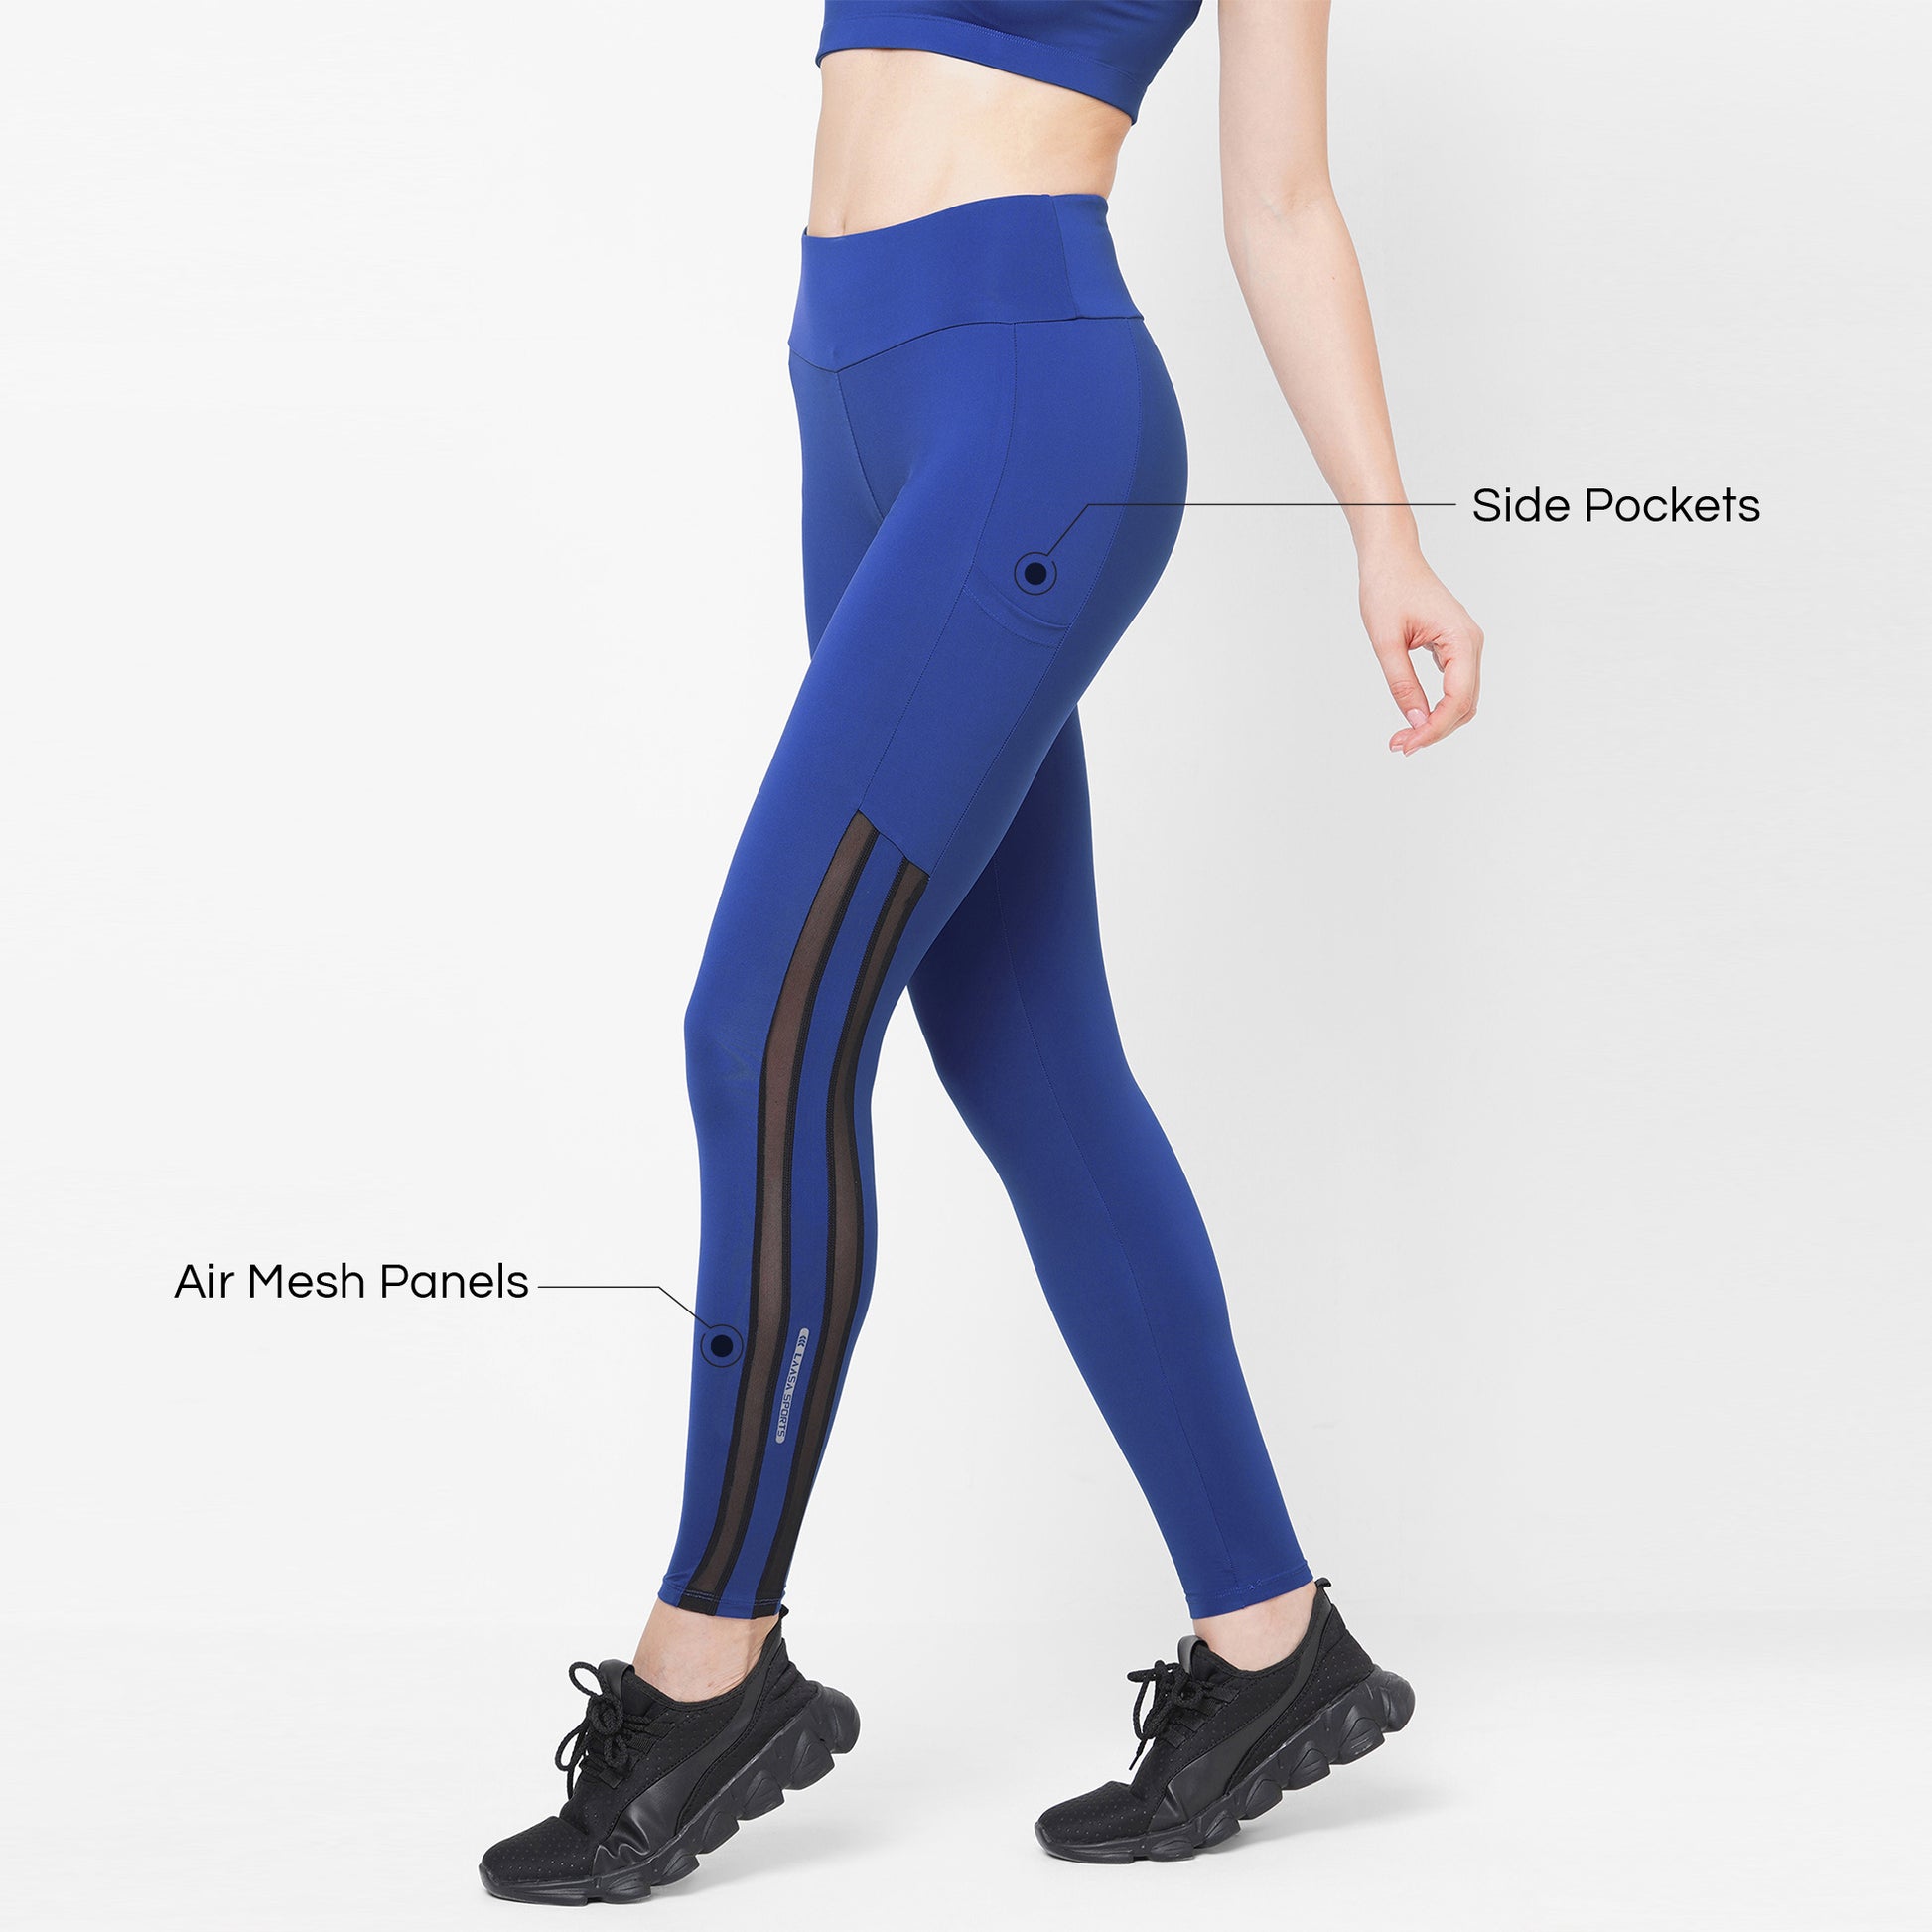 Womens NEW Leggings with Mesh Panel and Stripes Airy Sports Activewear  Pants G33